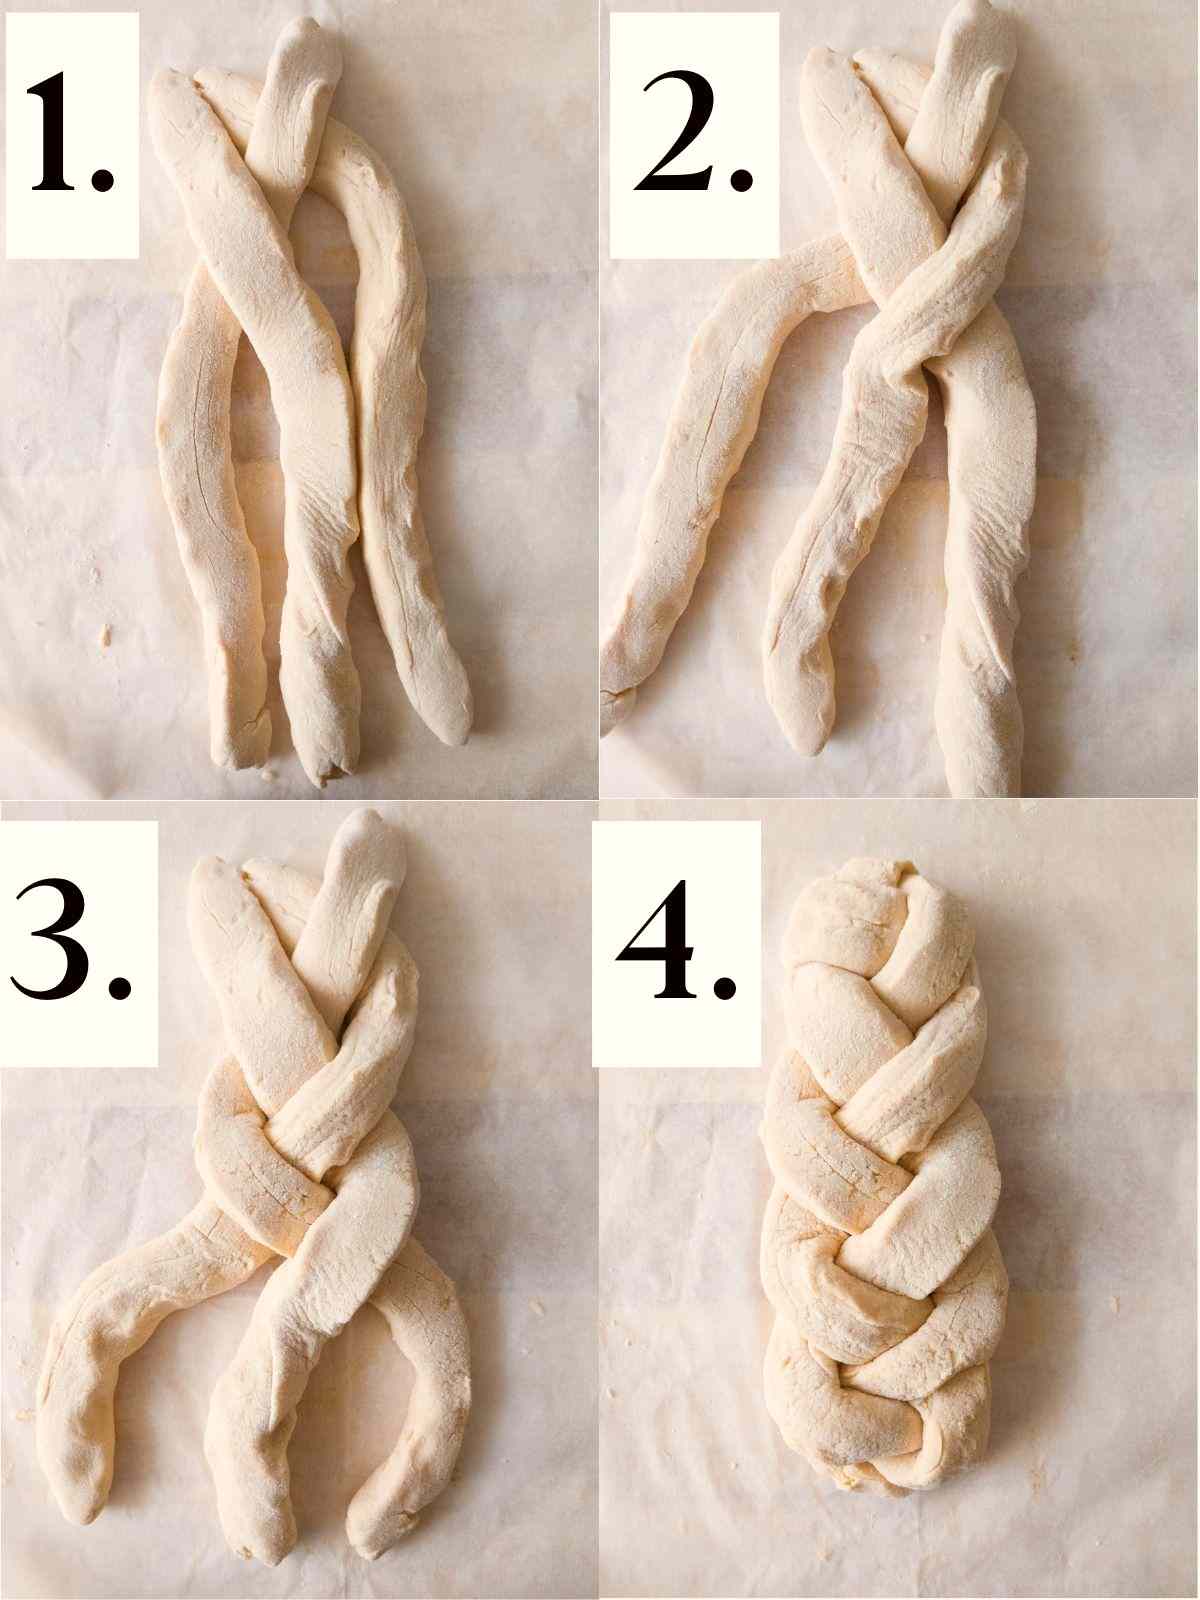 Four steps of braiding the challah.